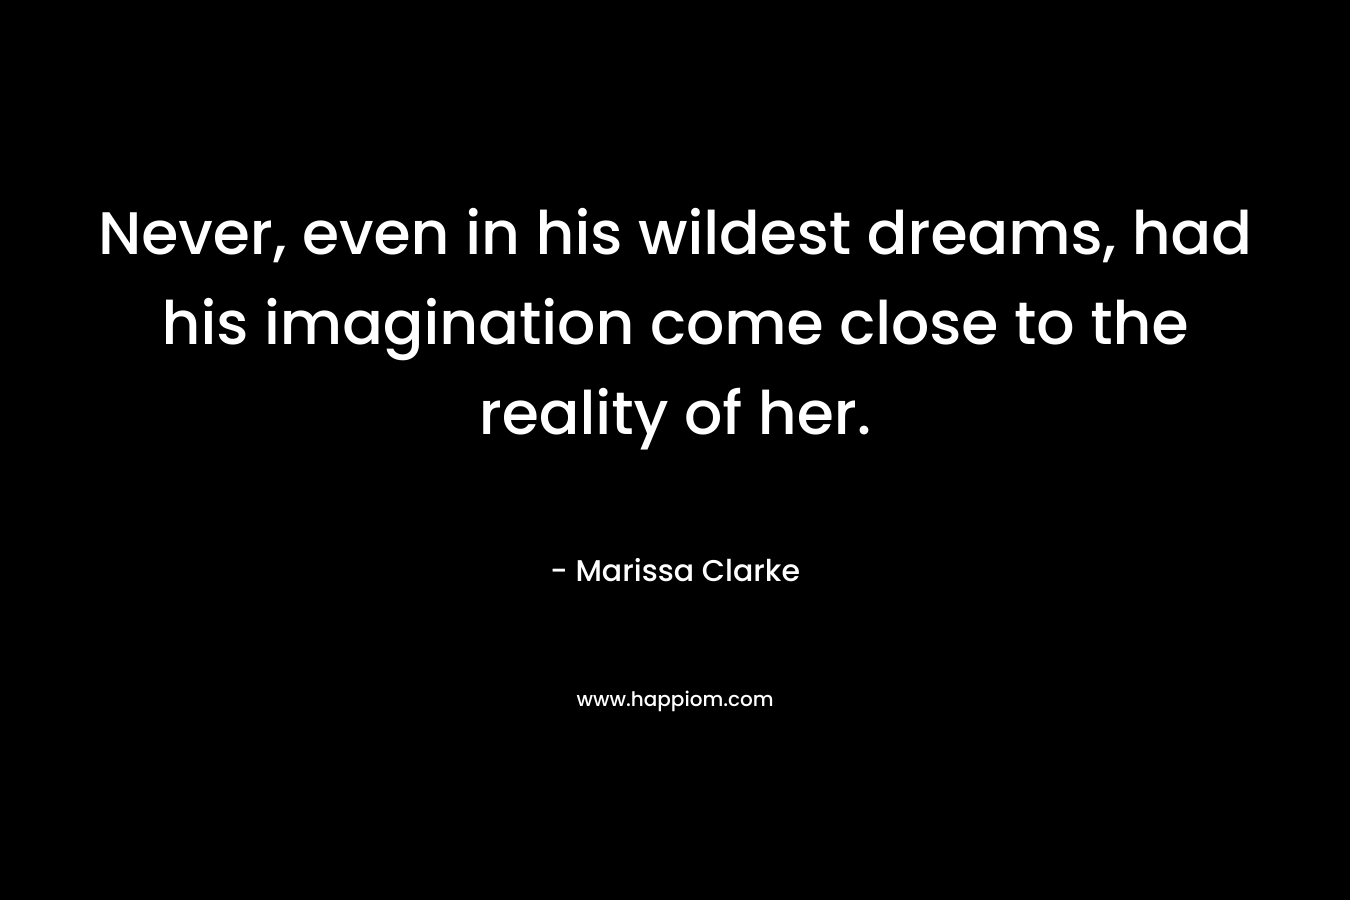 Never, even in his wildest dreams, had his imagination come close to the reality of her.